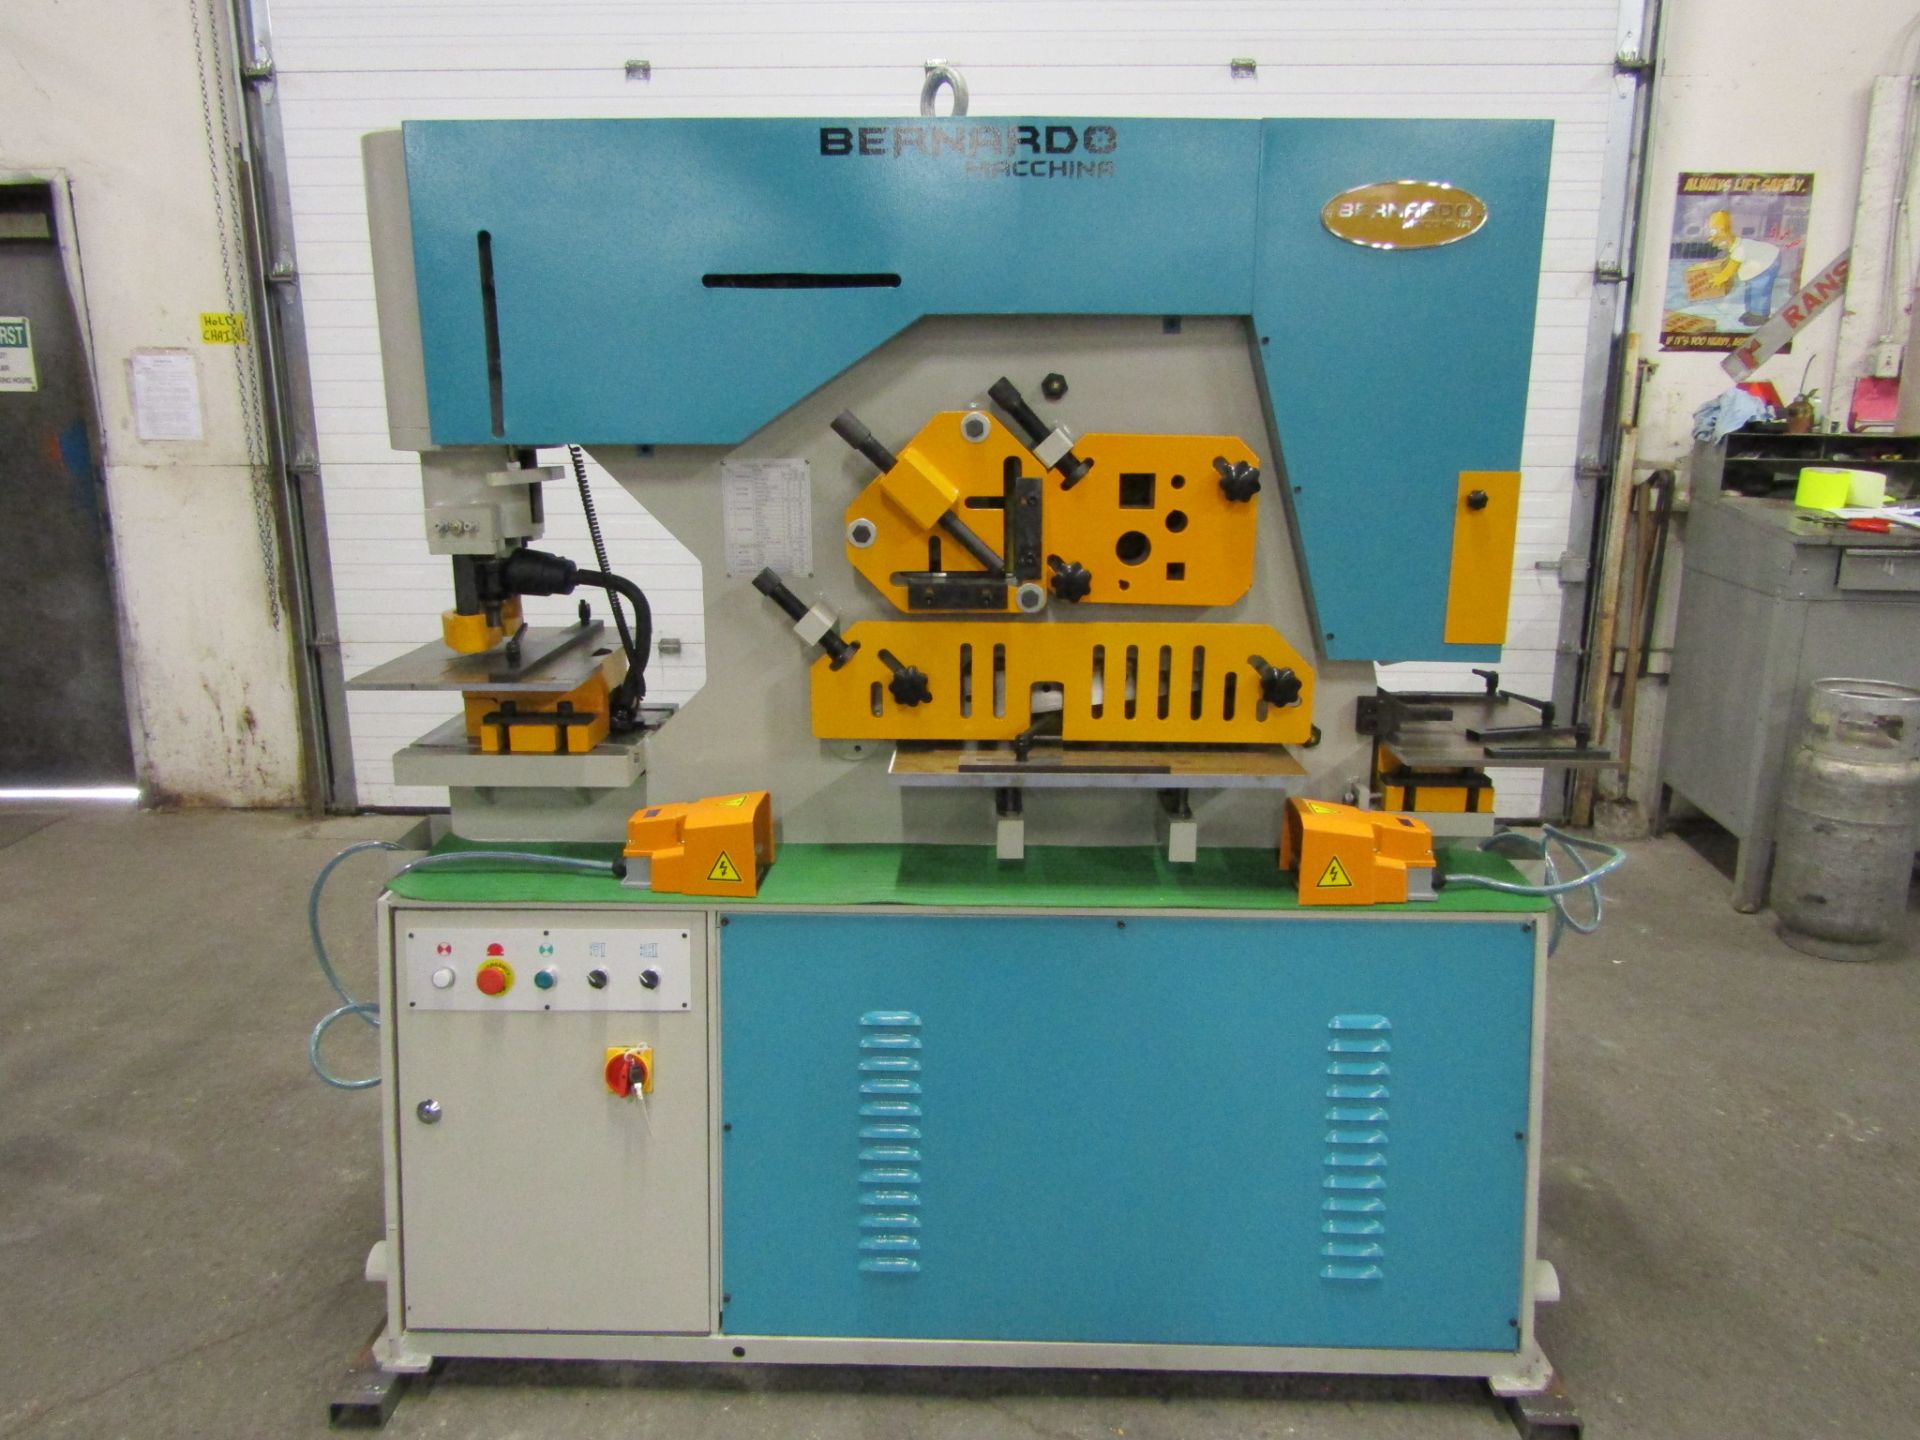 Bernardo Macchina 95 Ton Capacity Hydraulic Ironworker - complete with dies and punches - Dual